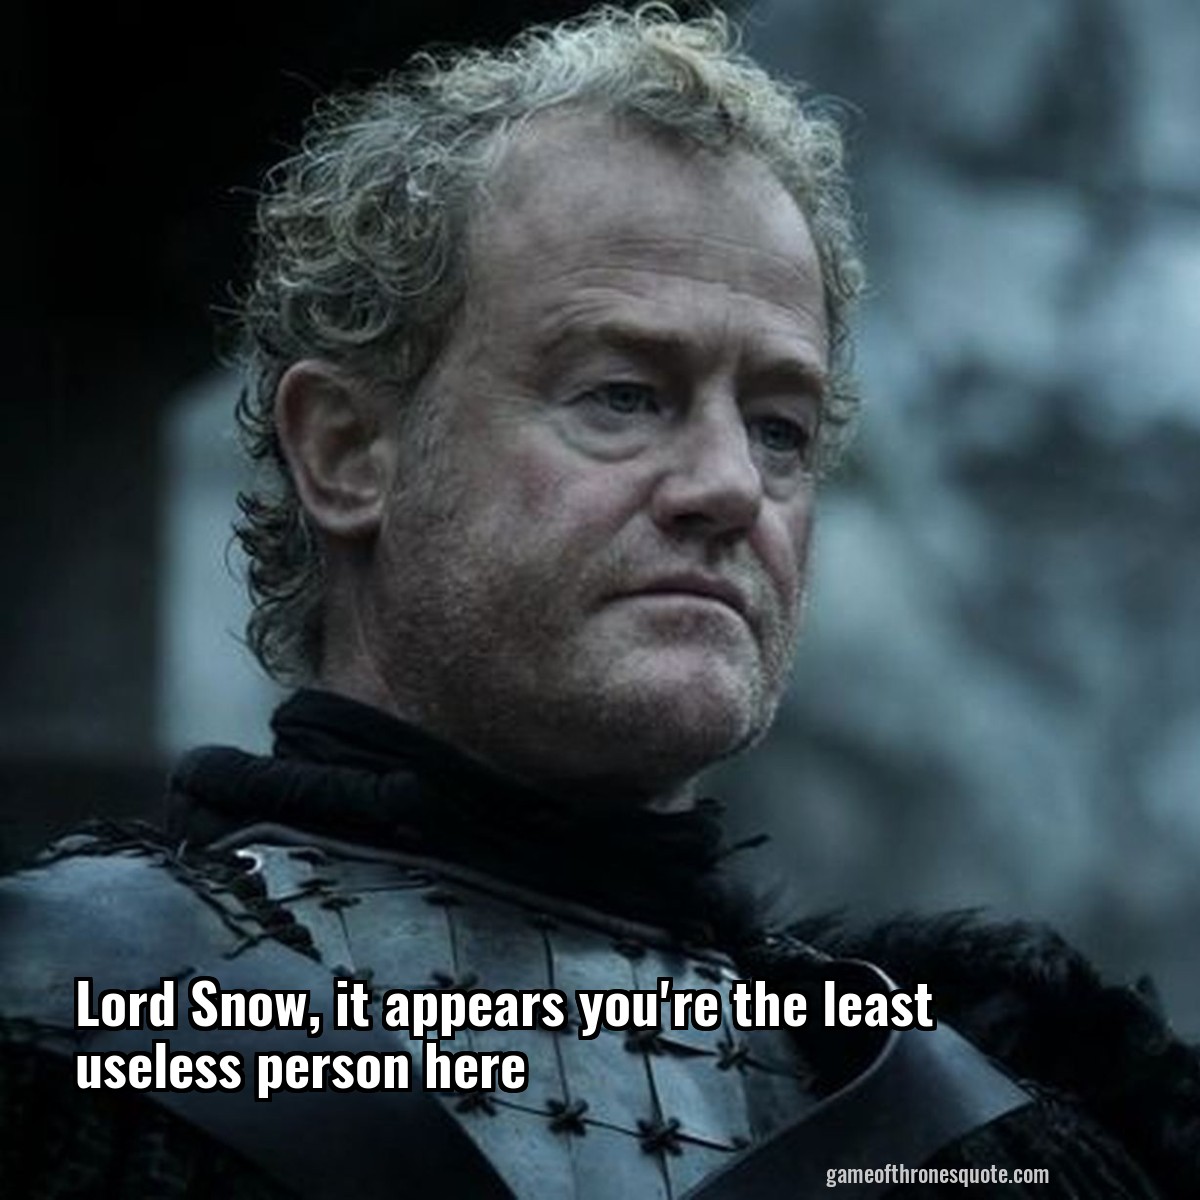 Lord Snow, it appears you're the least useless person here